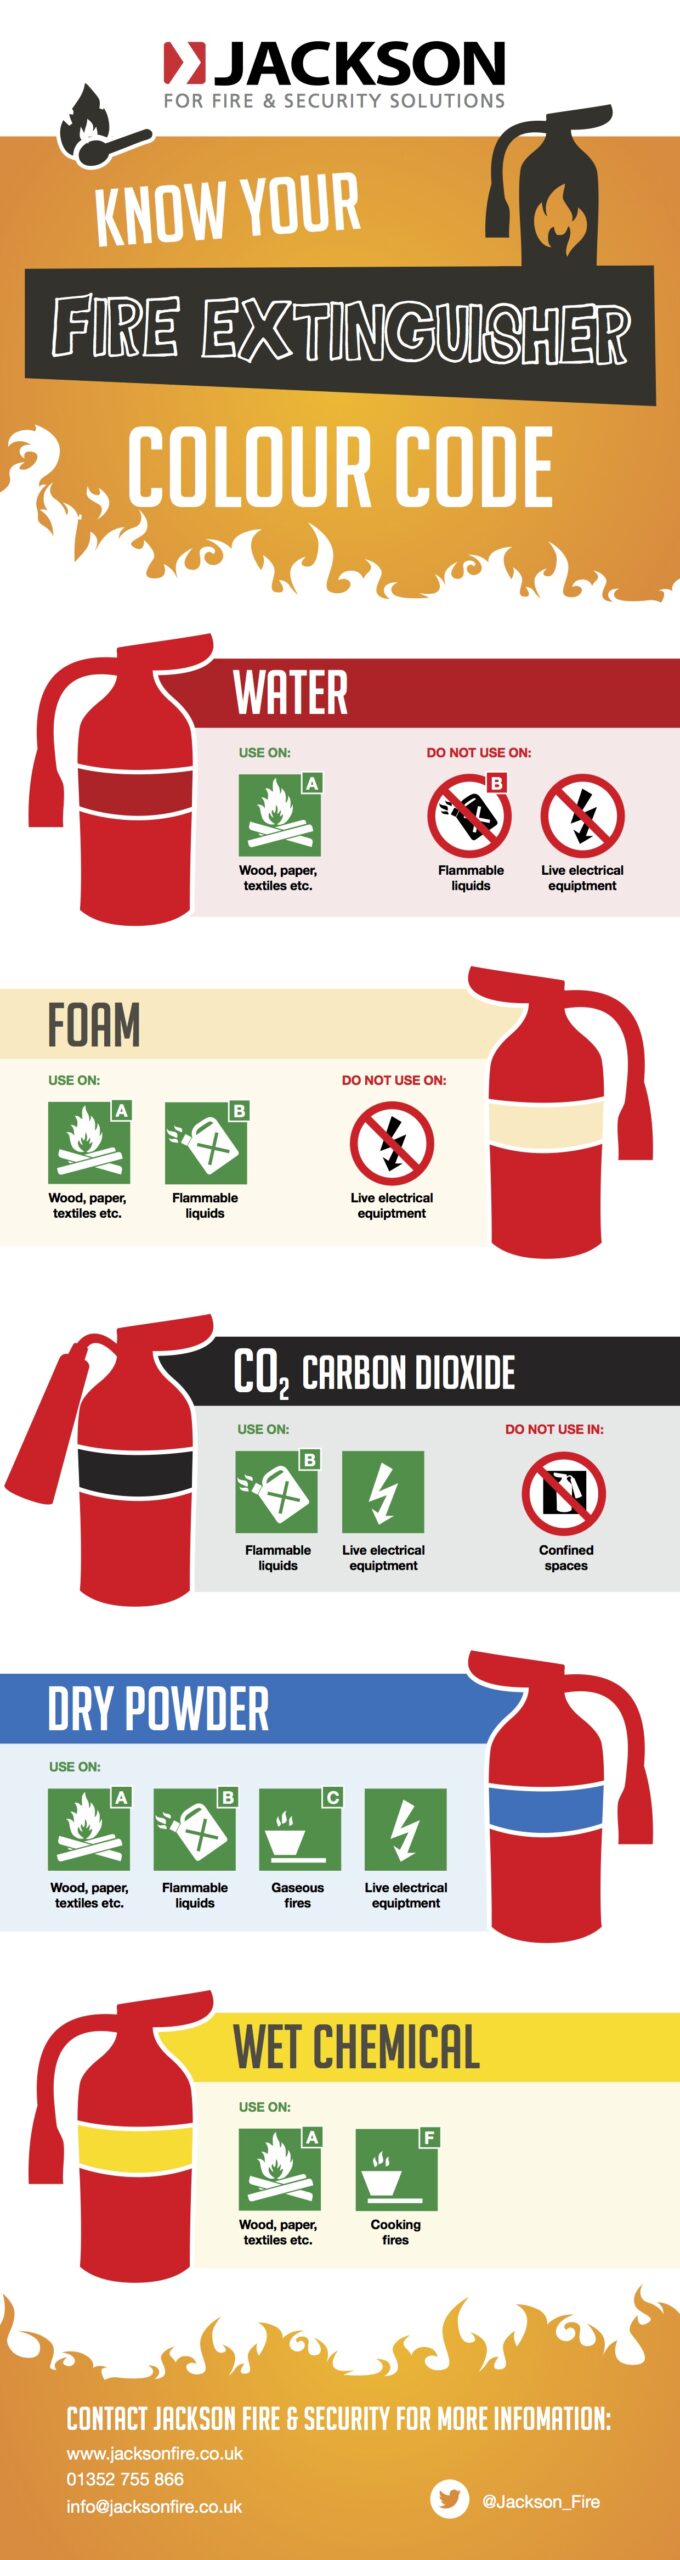 Infographic on when to use different types of fire extinguishers